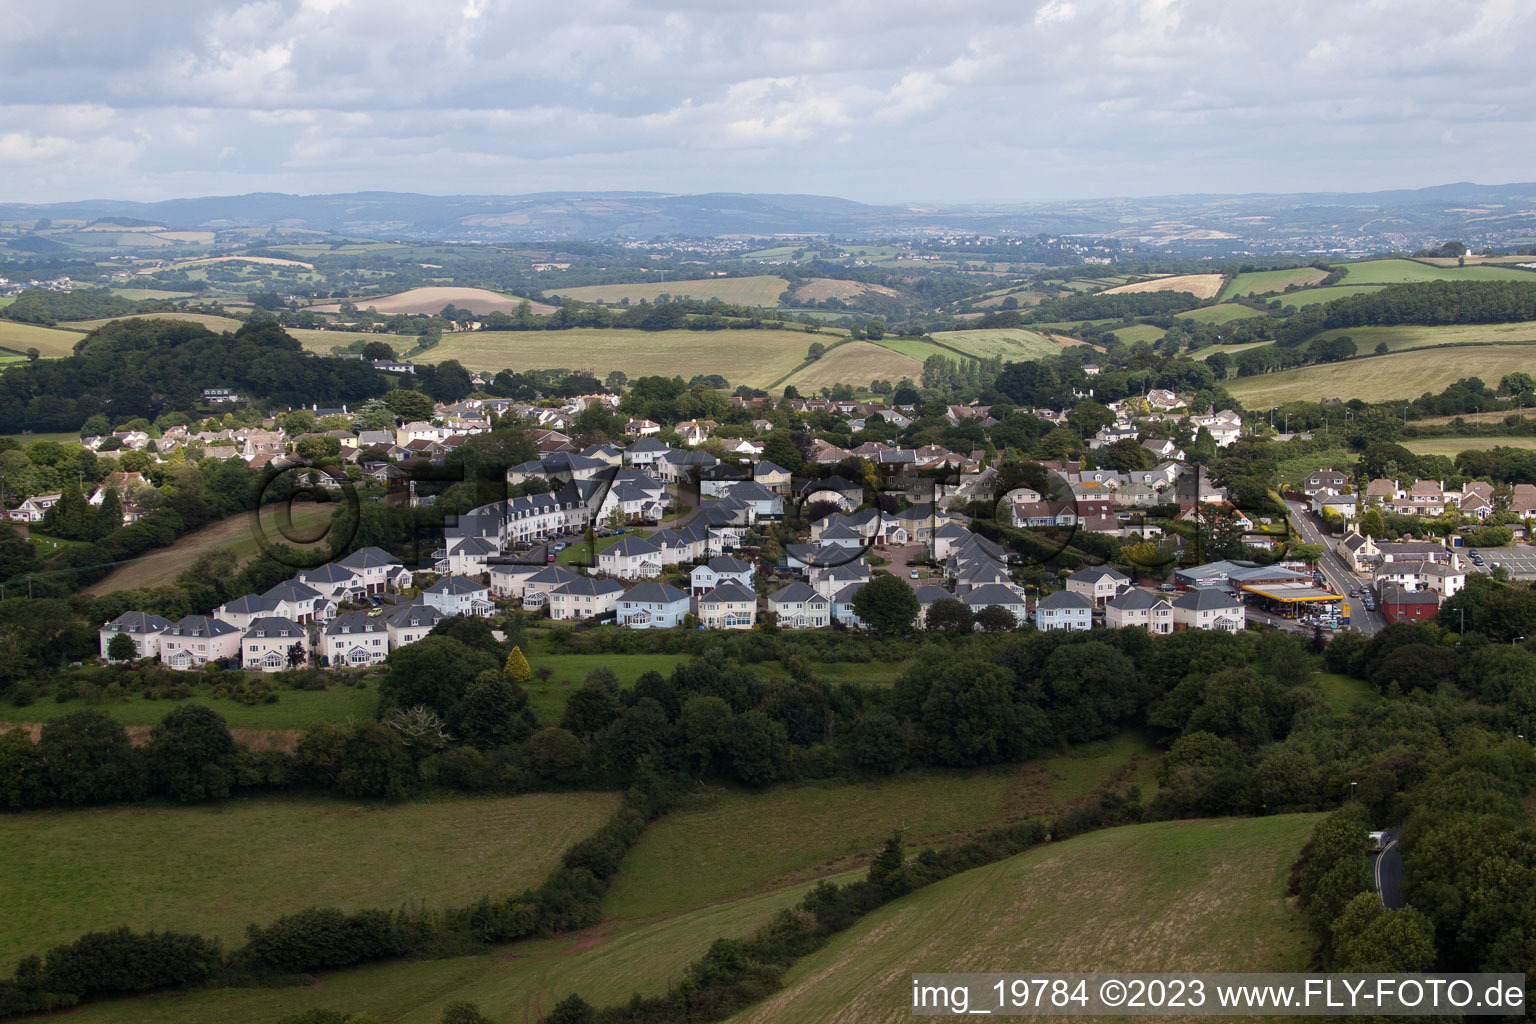 Marldon in the state England, Great Britain seen from a drone